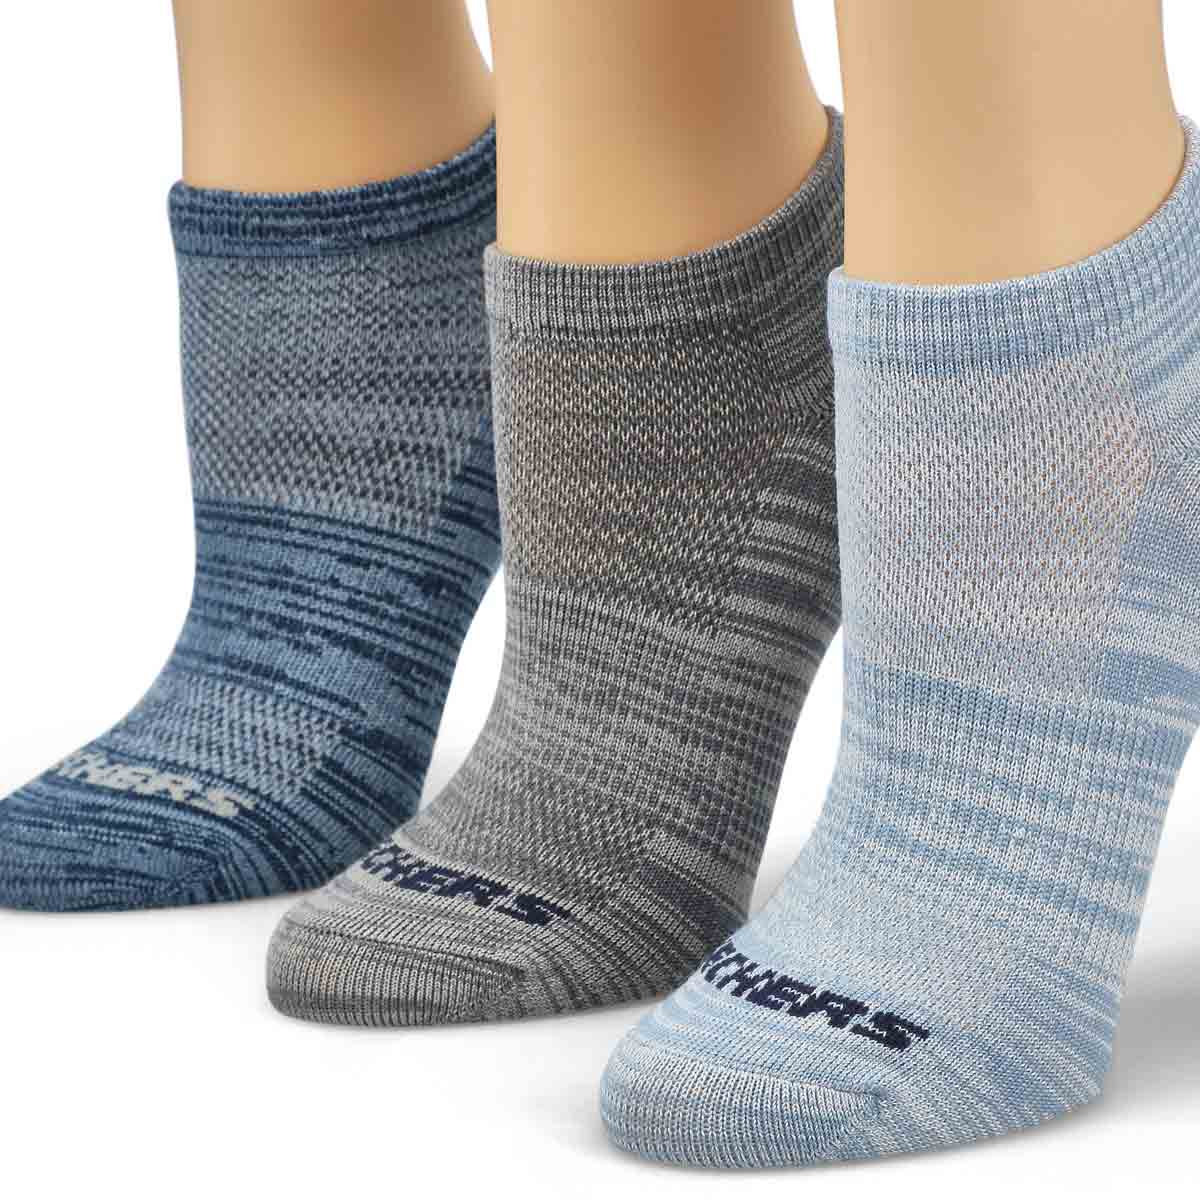 Boys' Low Cut Non Terry Sock - 6 pack